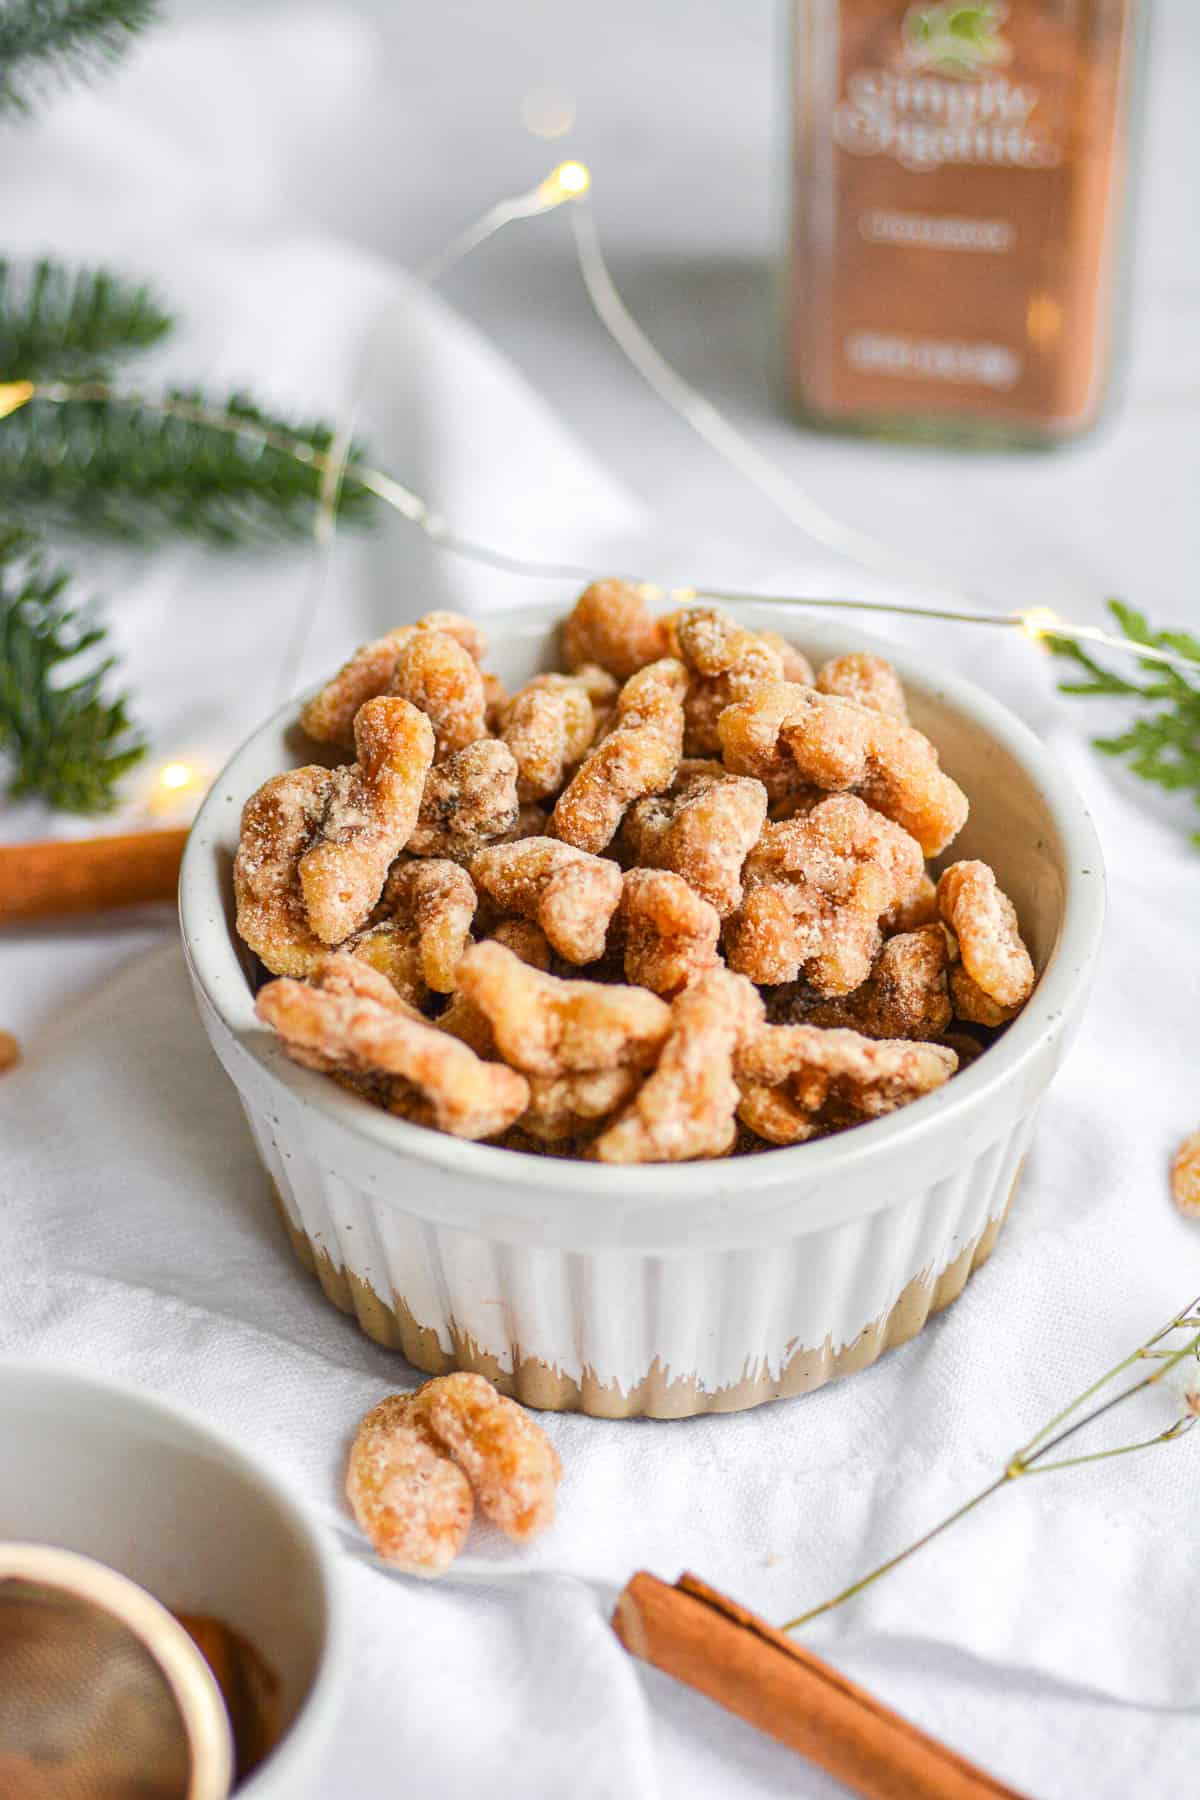 Candied nuts in a bowl